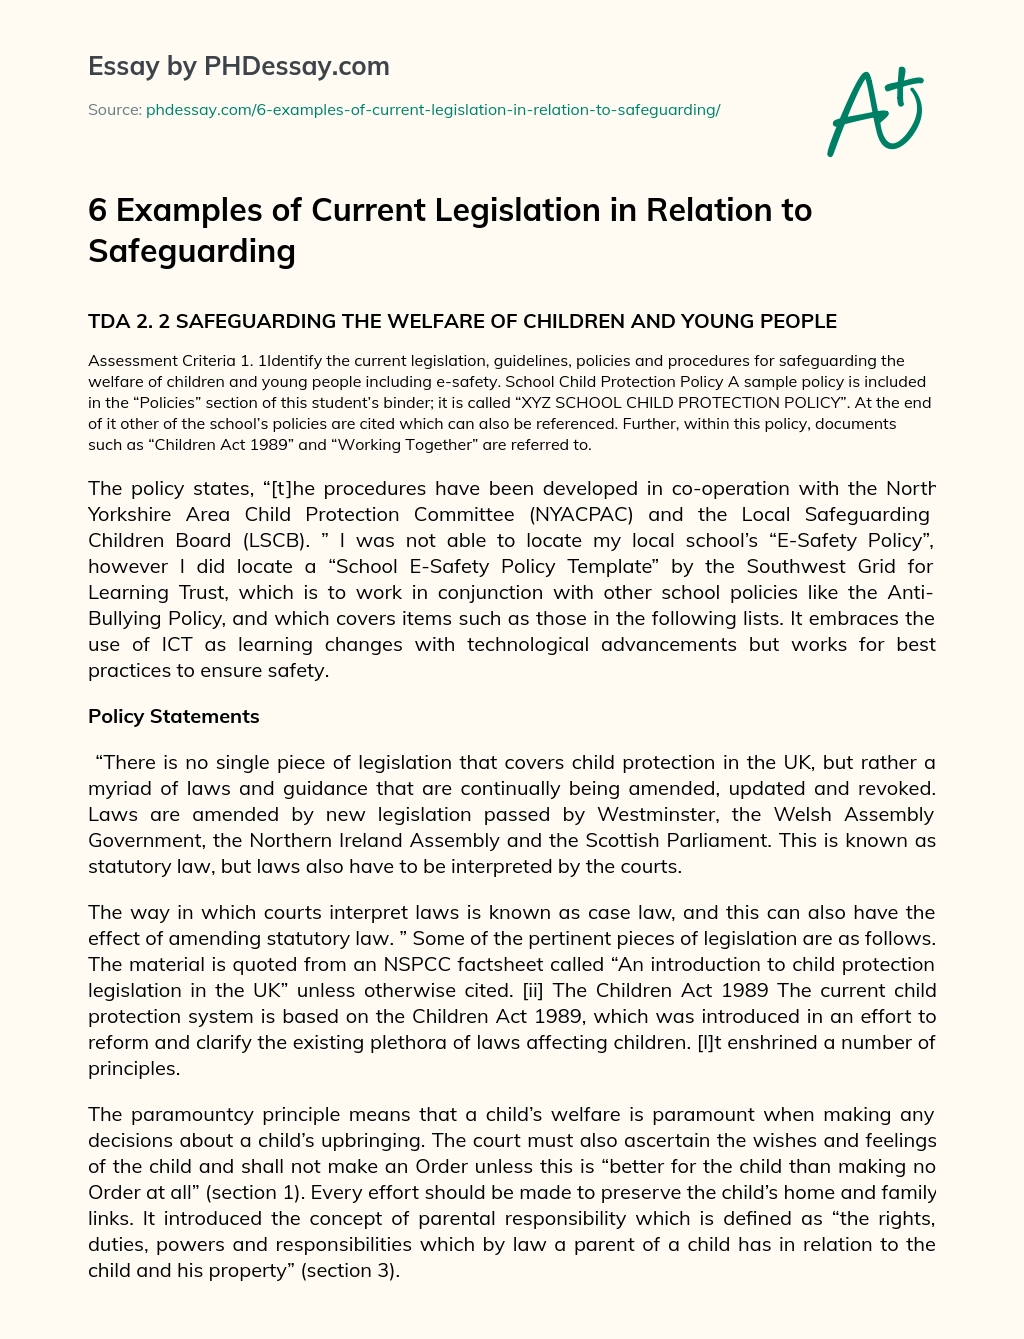 6 Examples of Current Legislation in Relation to Safeguarding essay